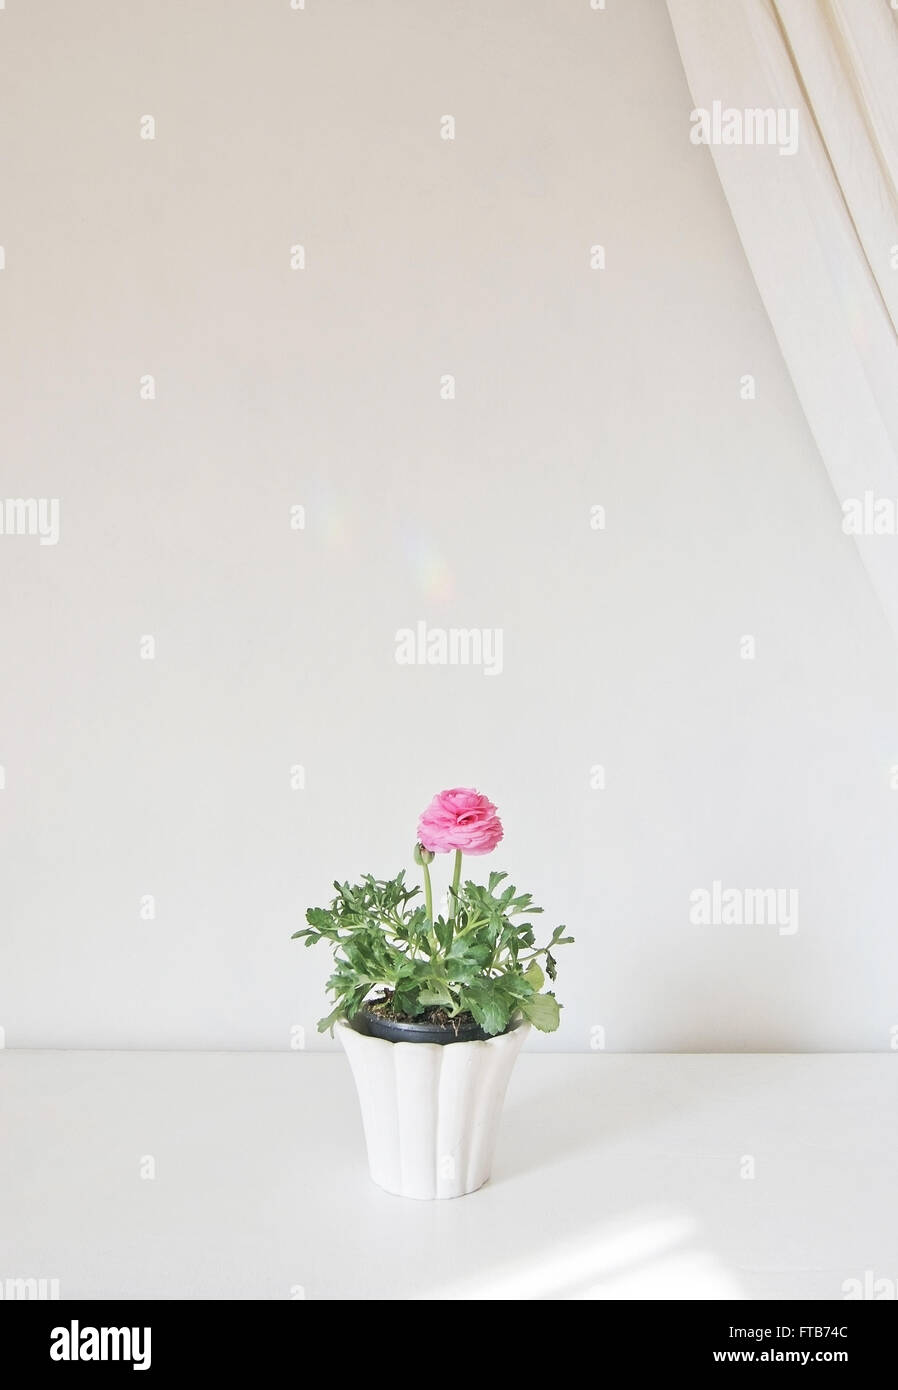 Pink ranunculus flower in pot with white linen drape against white wall. Stock Photo